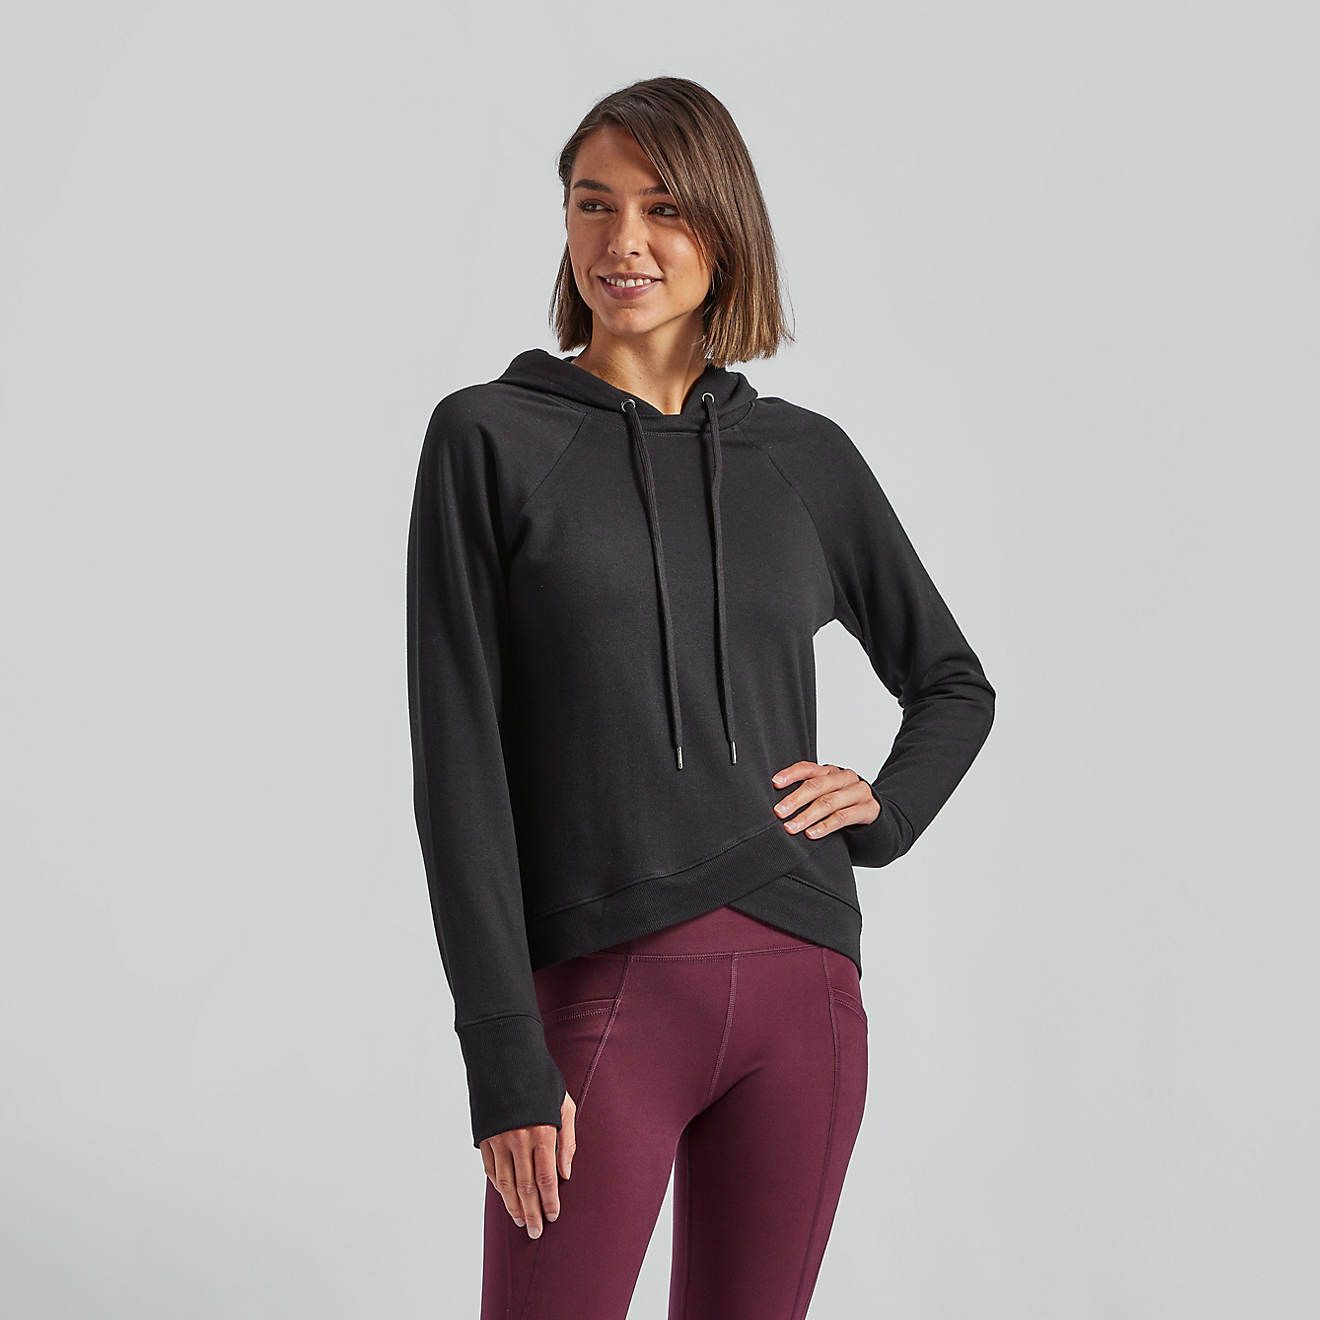 Freely Women's Jackie Overlap Hoodie | Academy | Academy Sports + Outdoors